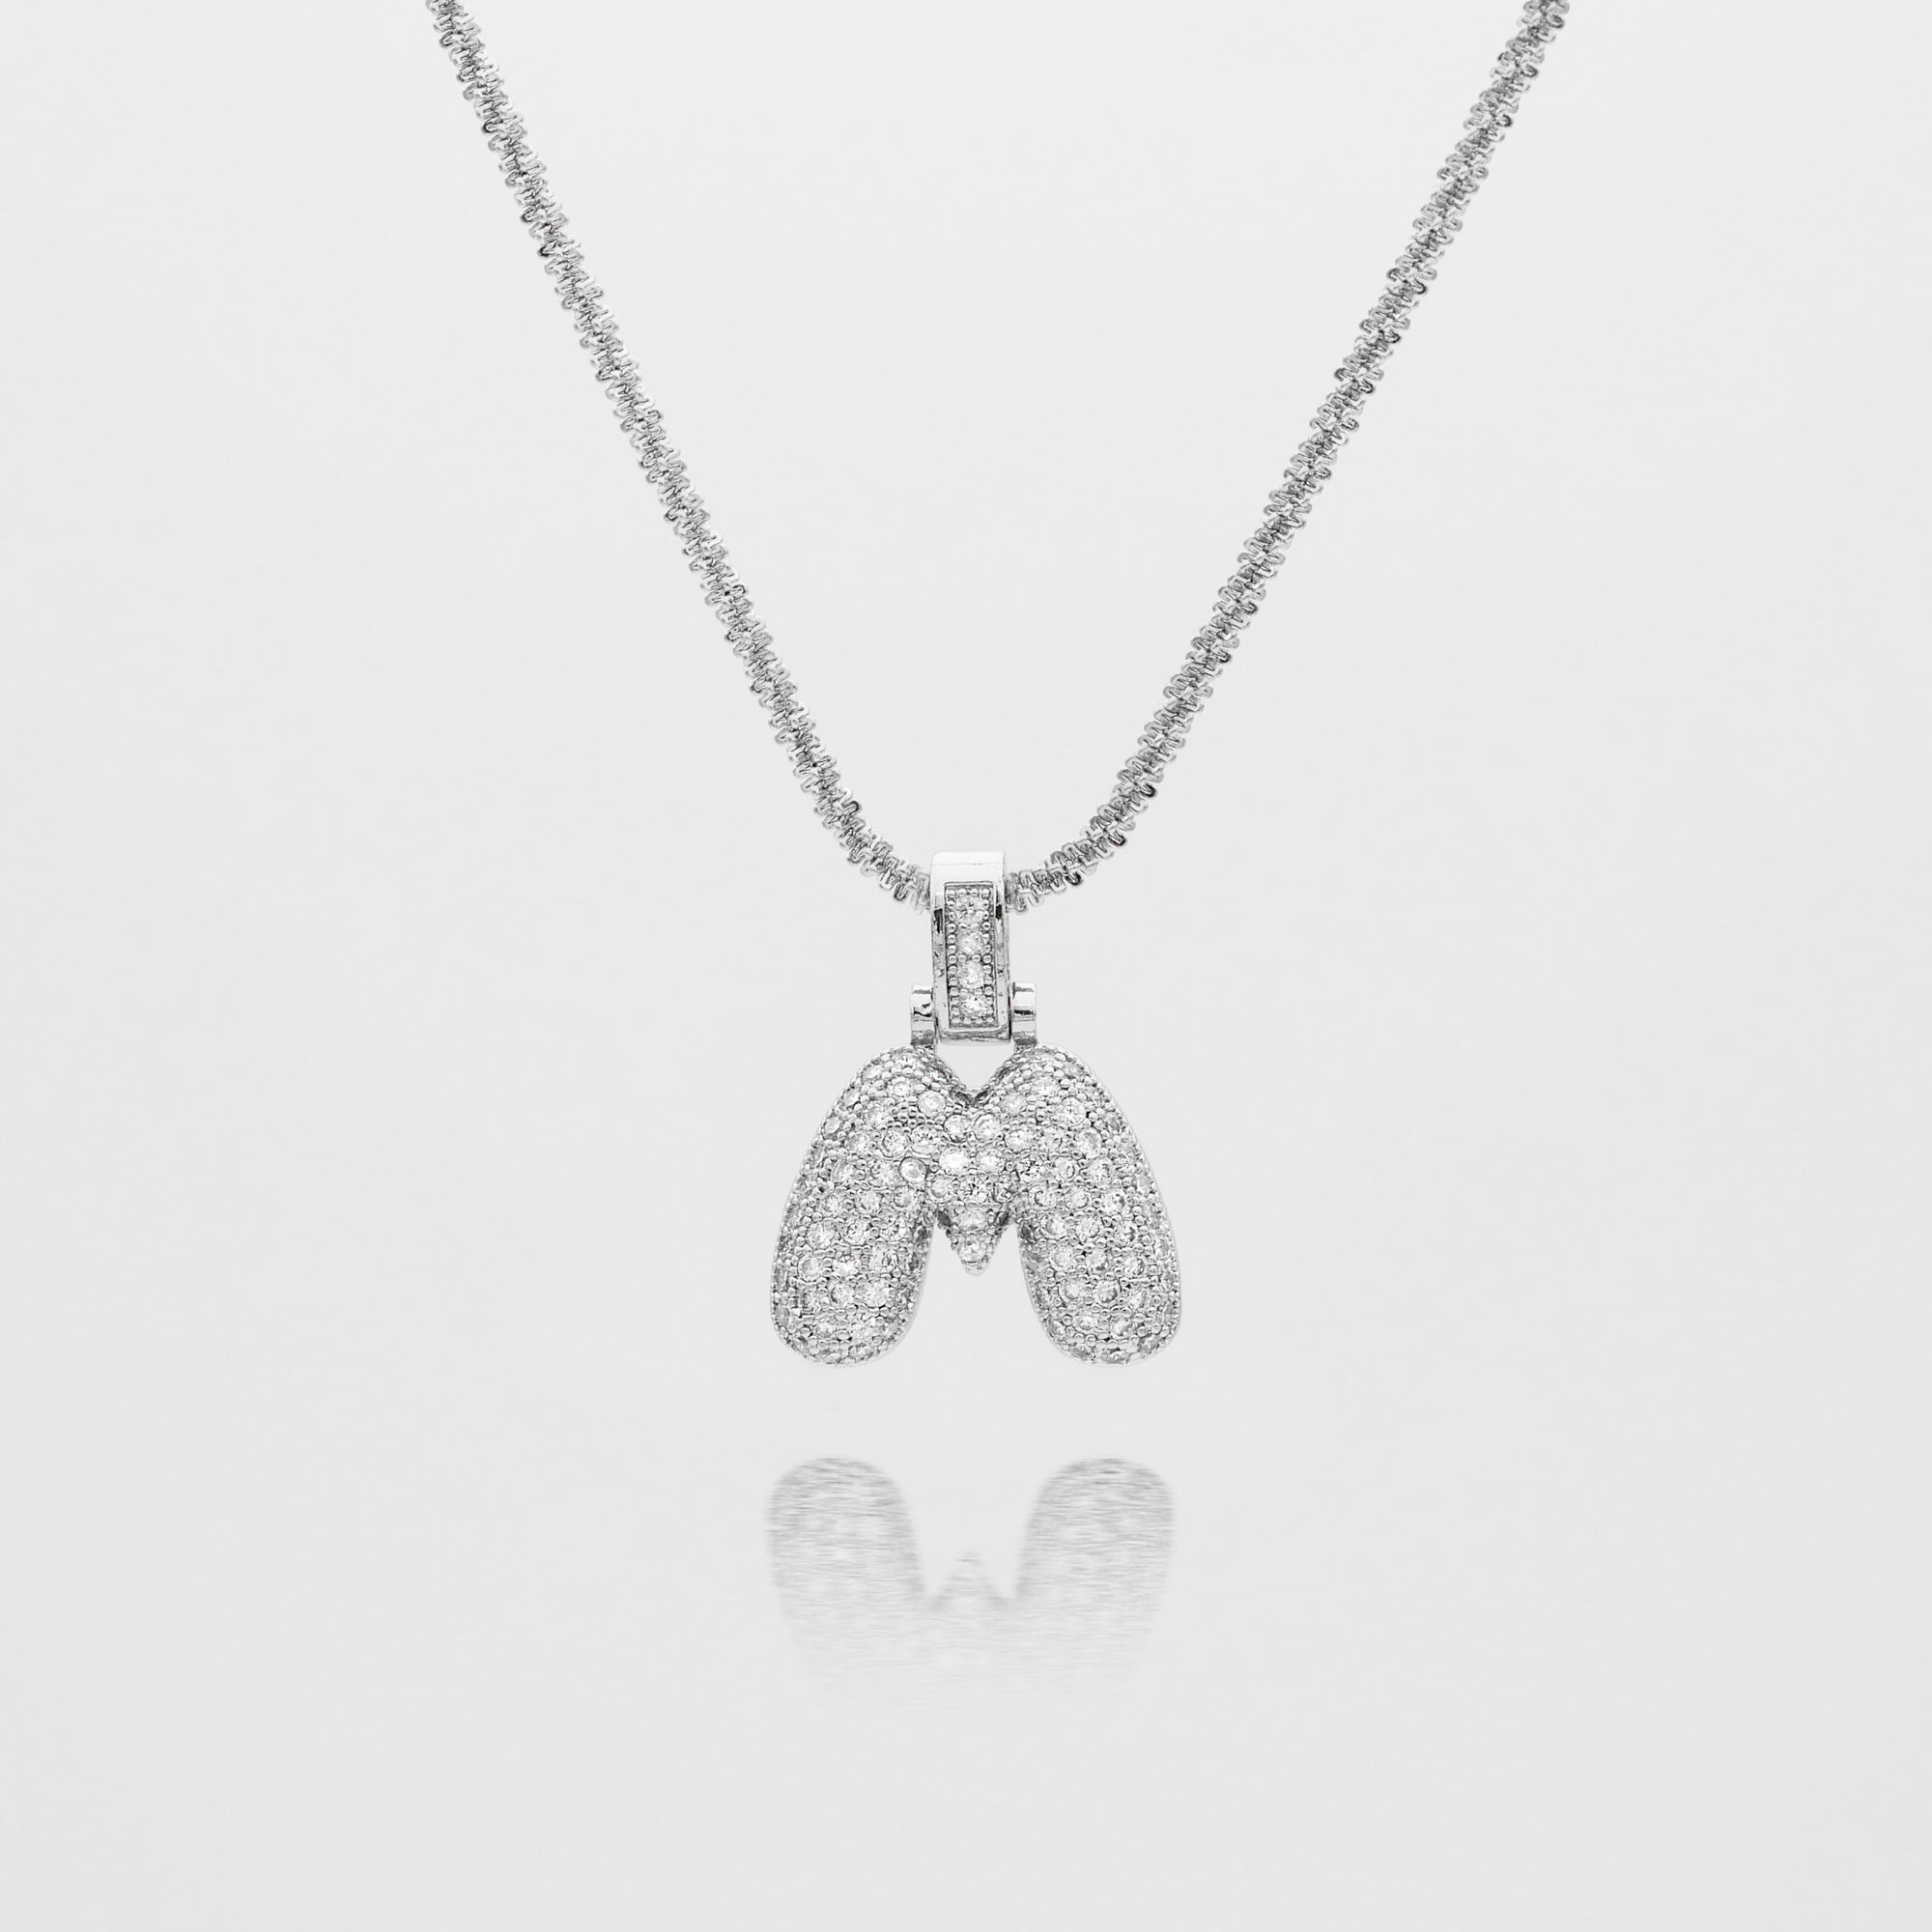 Pave Bubble Letter Initial Necklace encrusted with radiant CZ stones in silver tennis chain